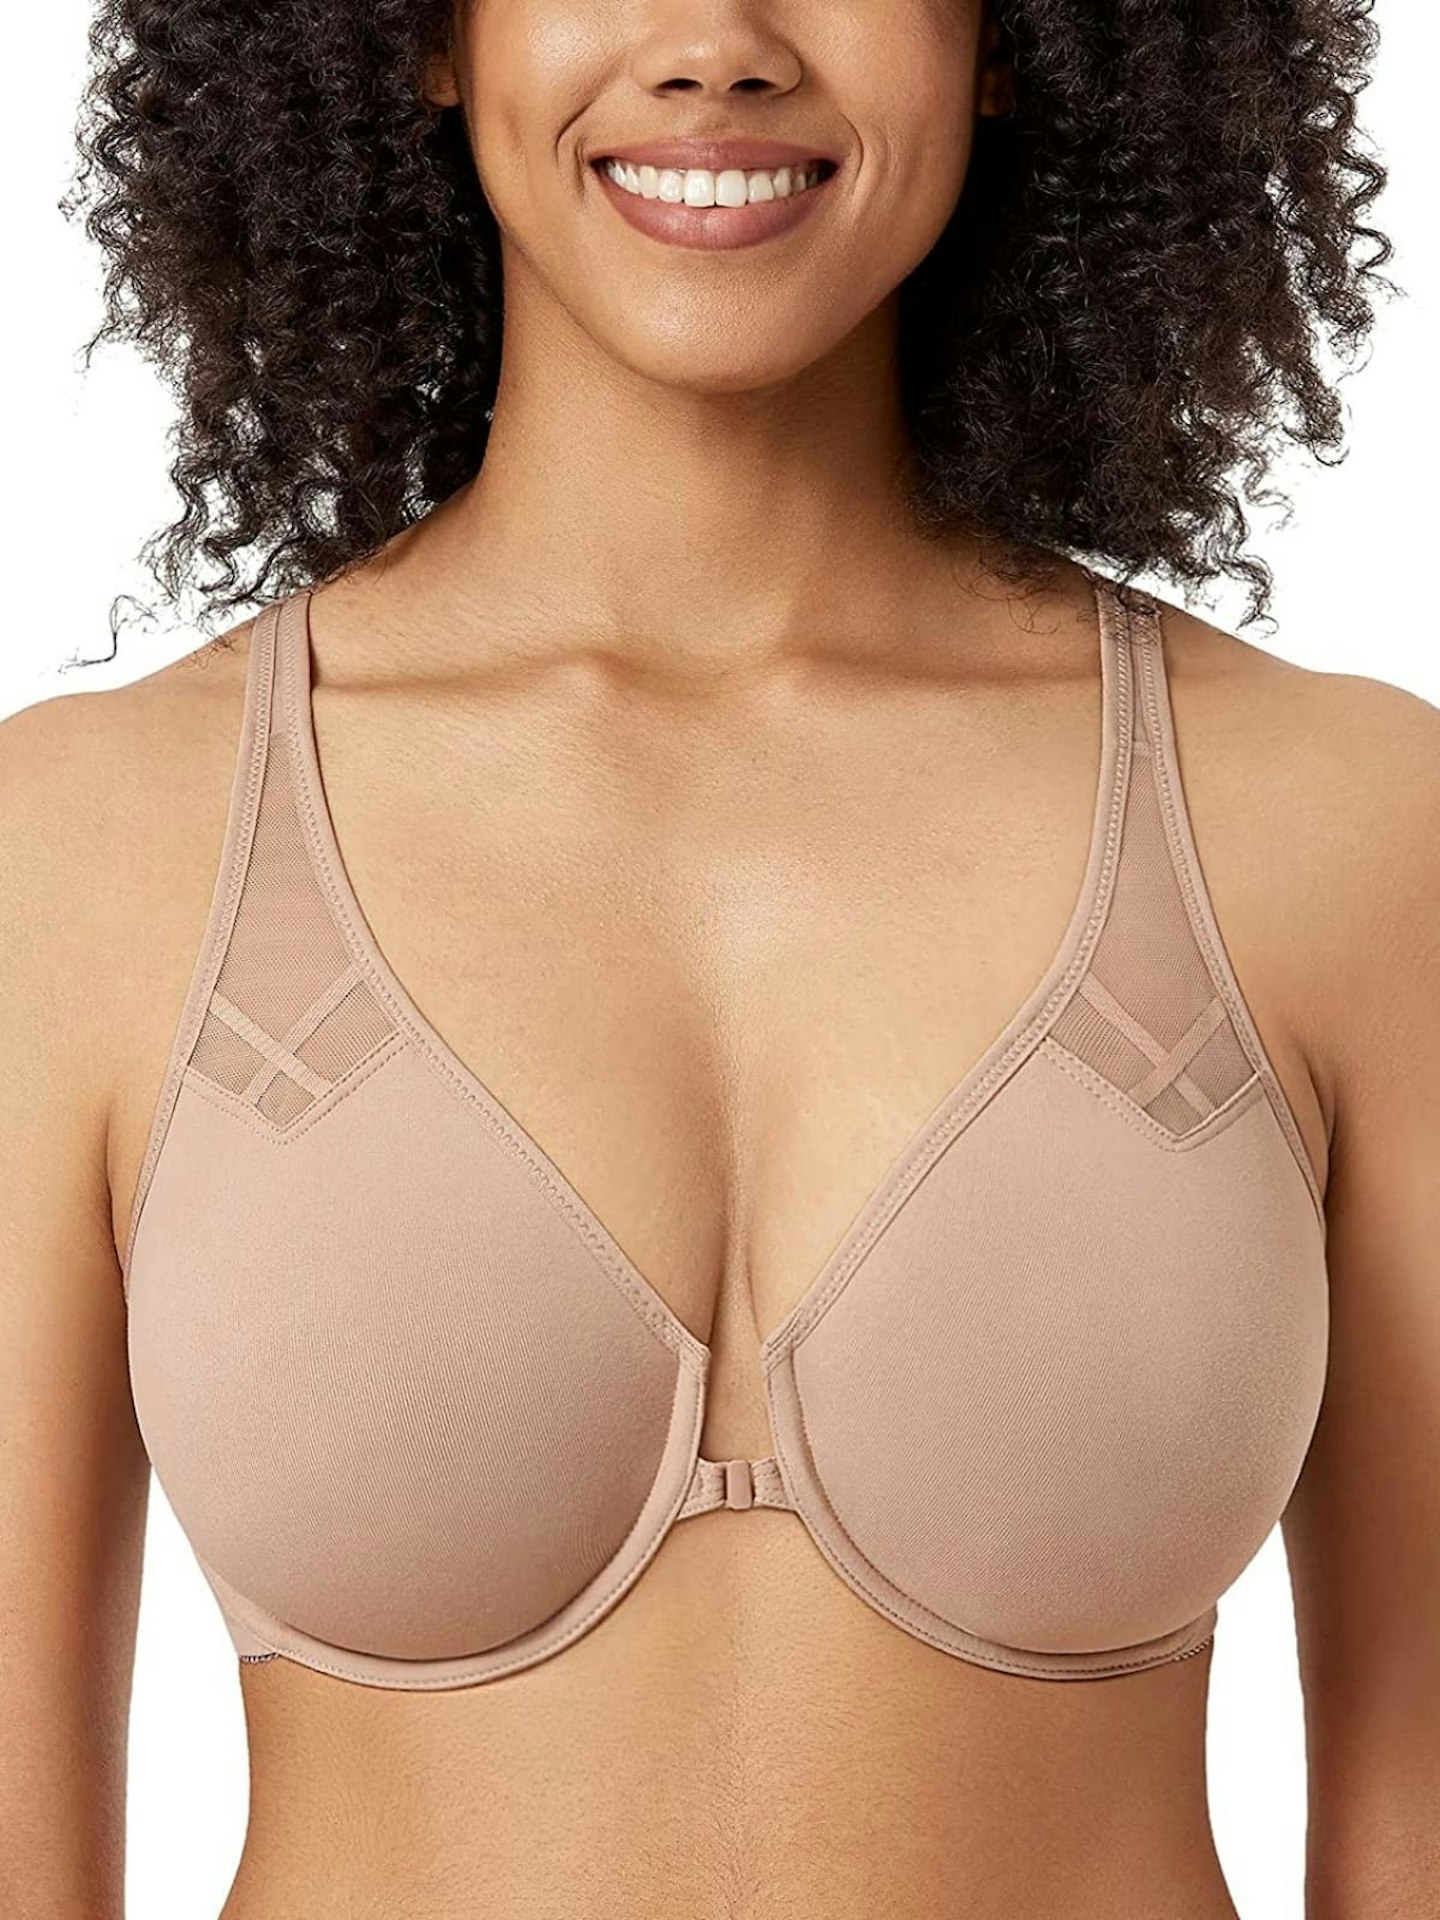 👙BRA HACK 3: 🤩THE BEST STRAPLESS BRA TIP YOU WILL EVER SEE